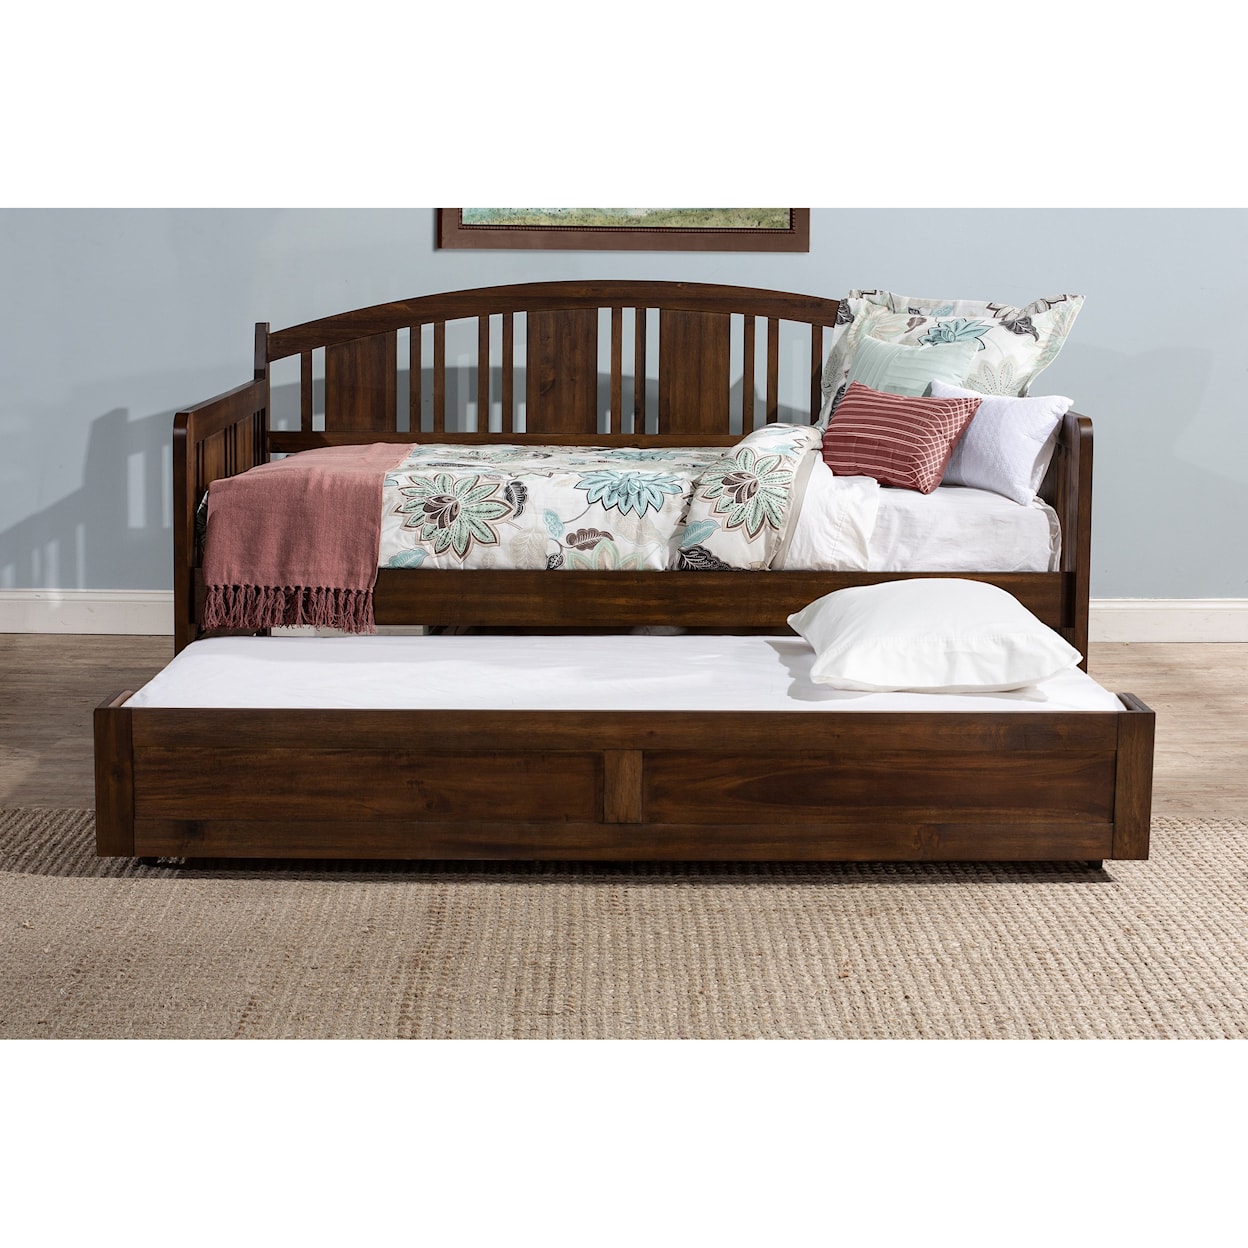 Hillsdale Dana Daybed with Trundle